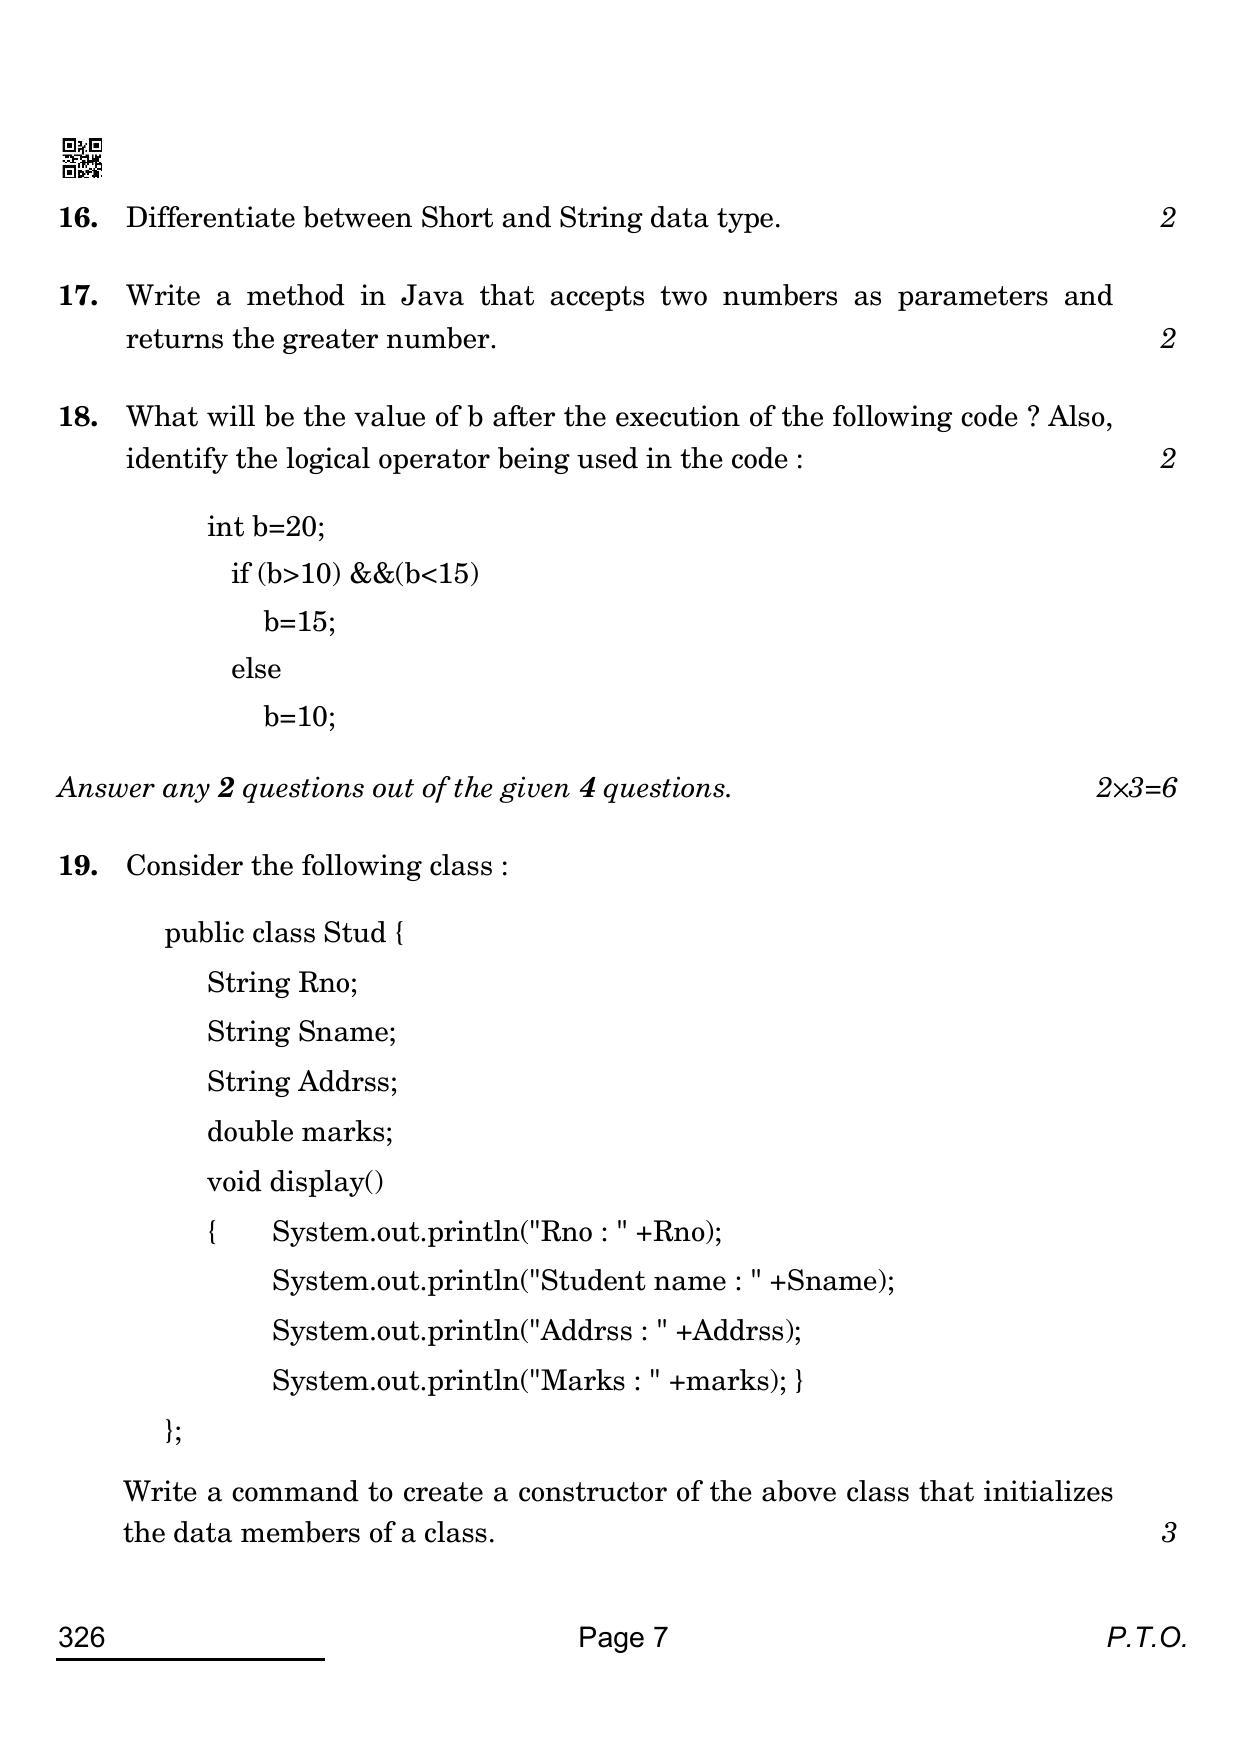 CBSE Class 12 326_Information Technology 2022 Question Paper - Page 7